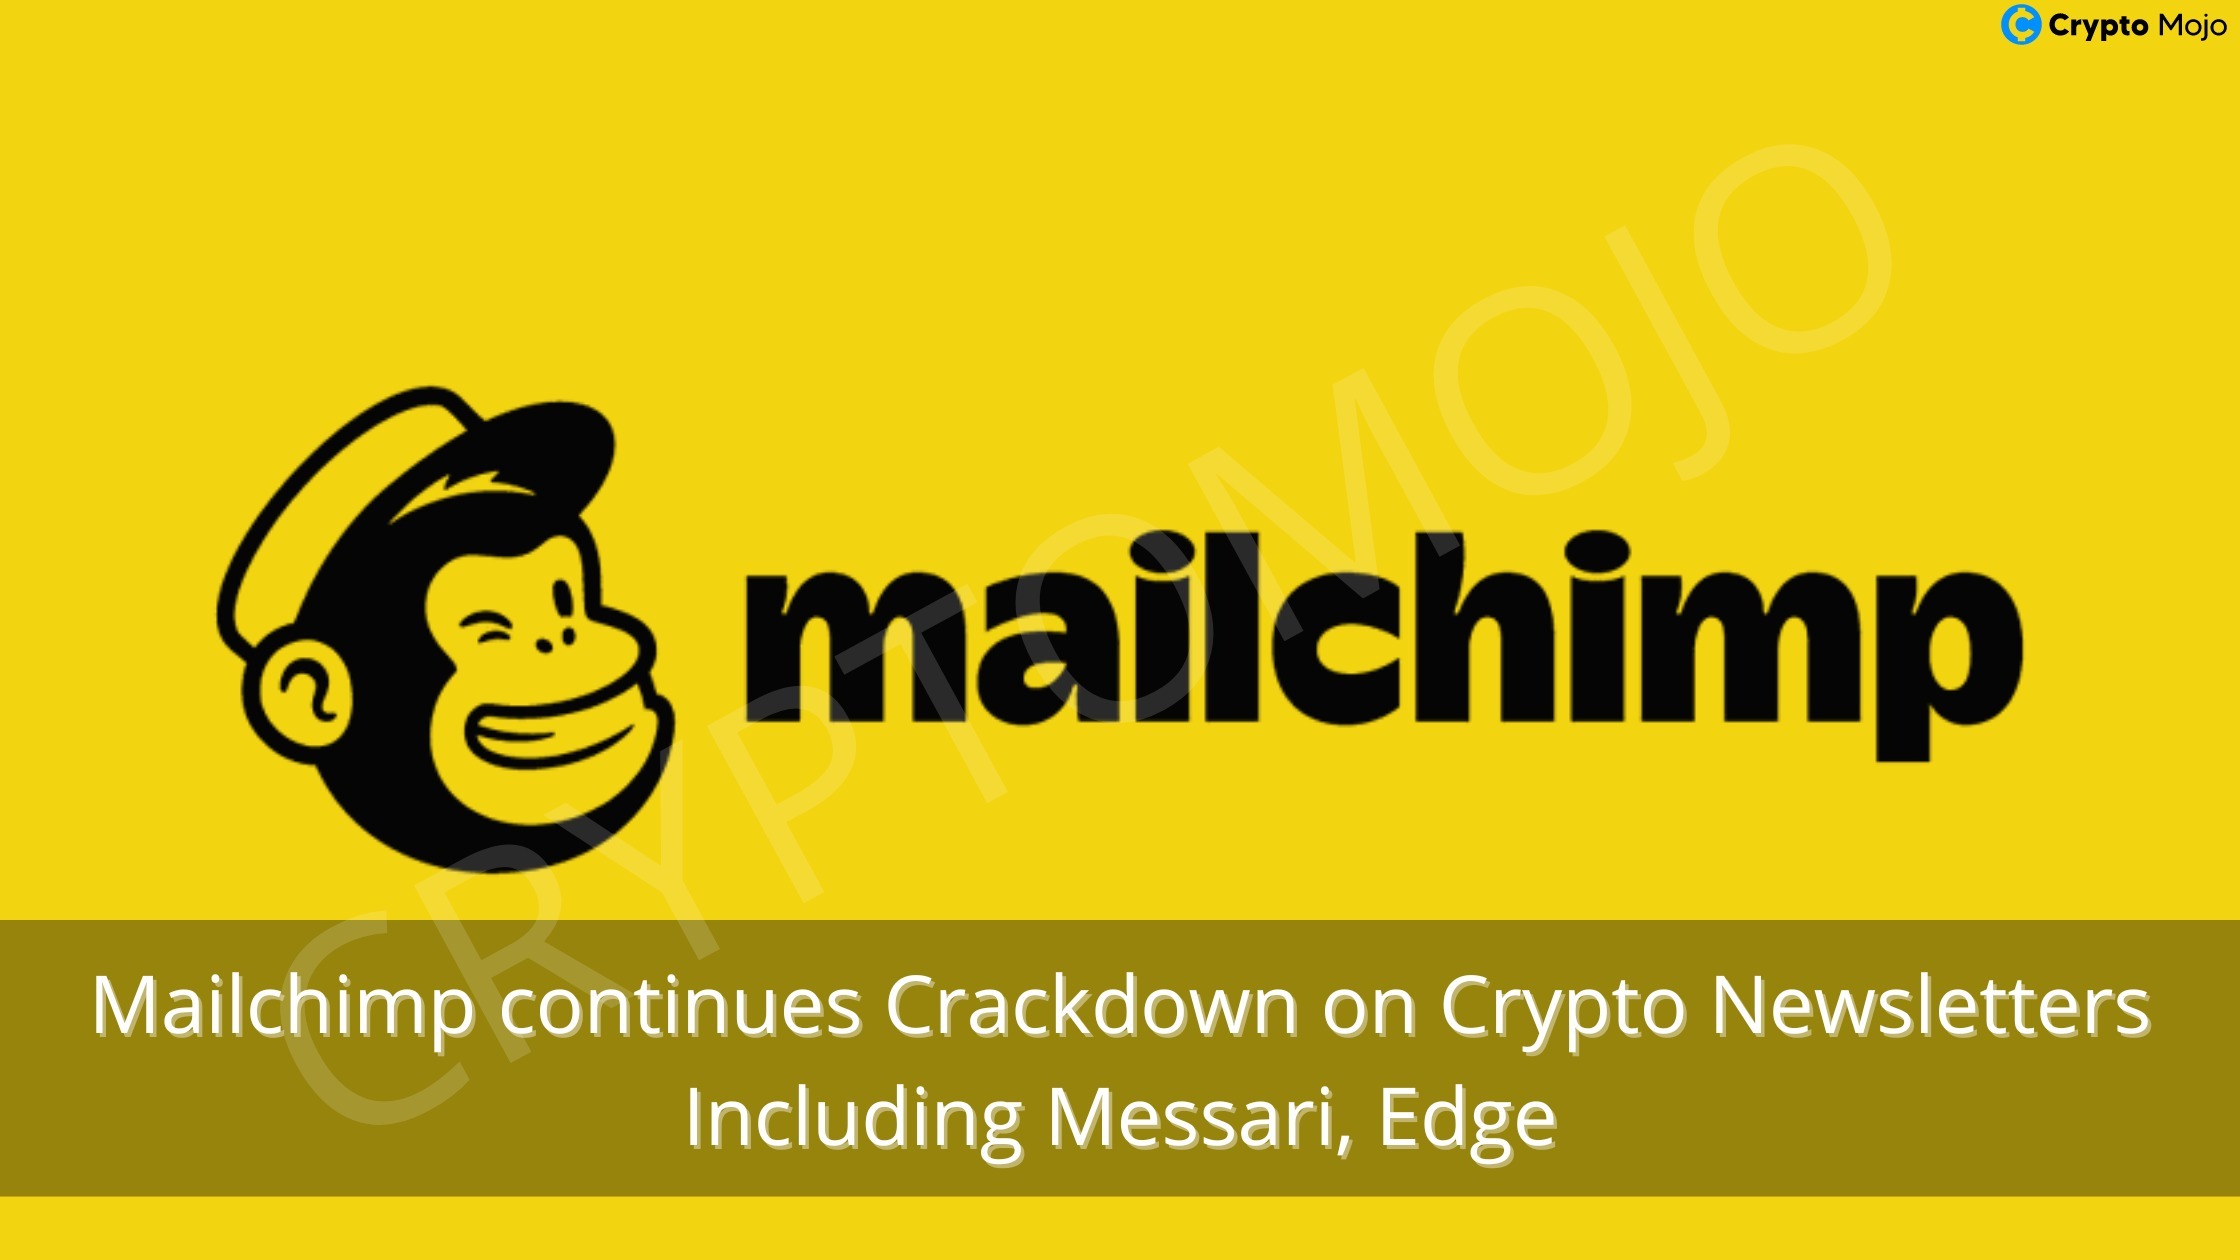 Mailchimp Continues Crackdown On Crypto Newsletters Including Messari, Edge!